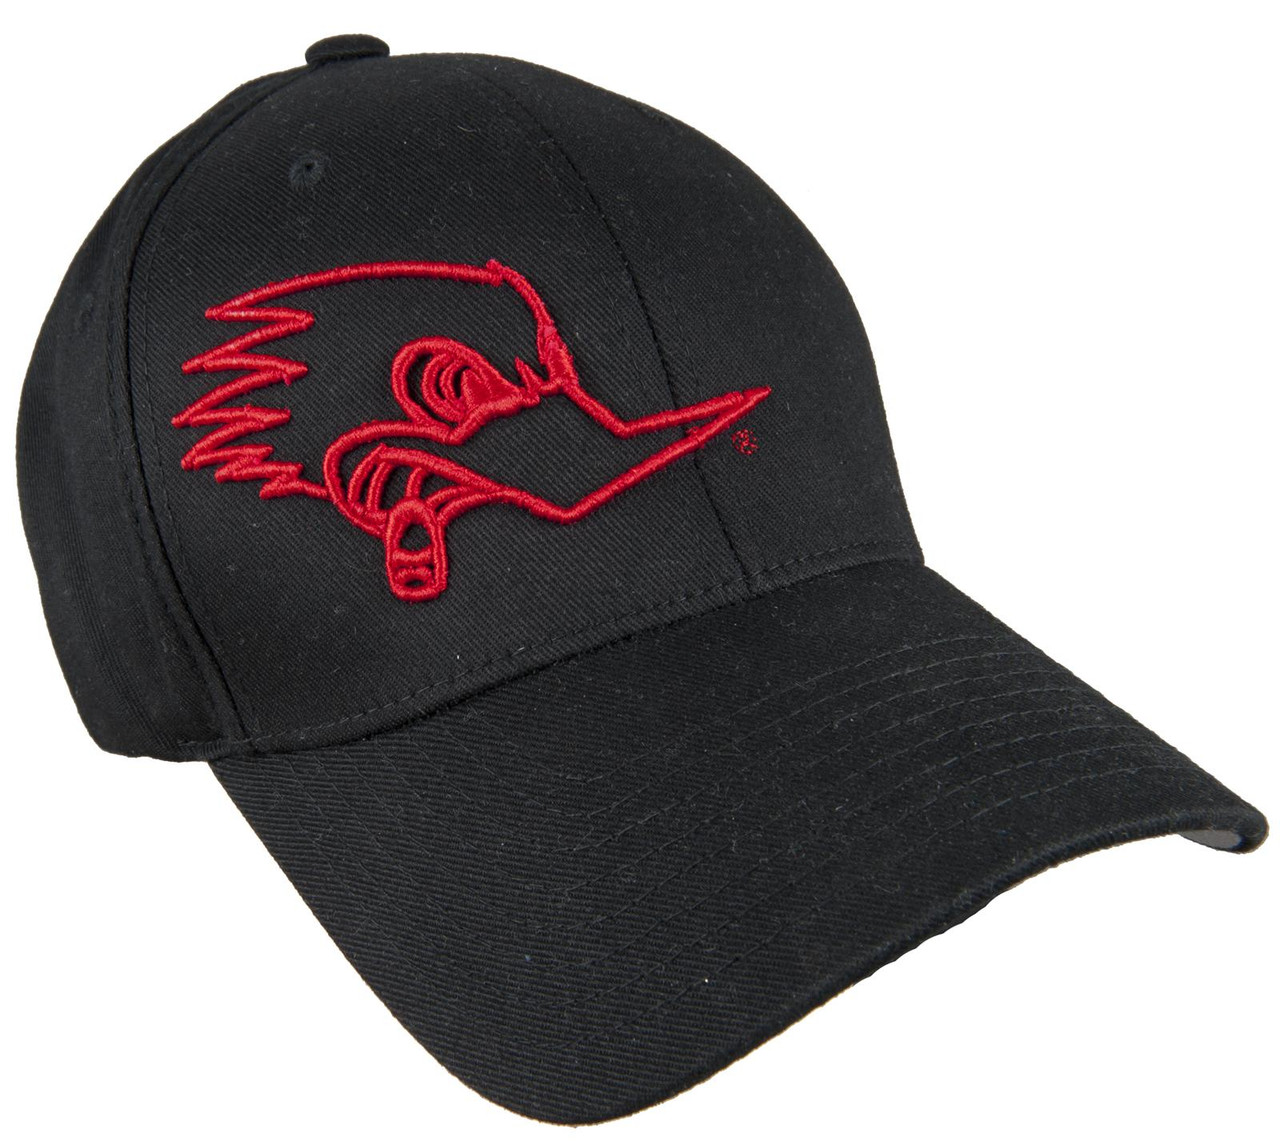 Horsepower Hat Cams Black Arizona - FlexFit - S/M Red Outline Clay Smith Vintage Mr. of Parts